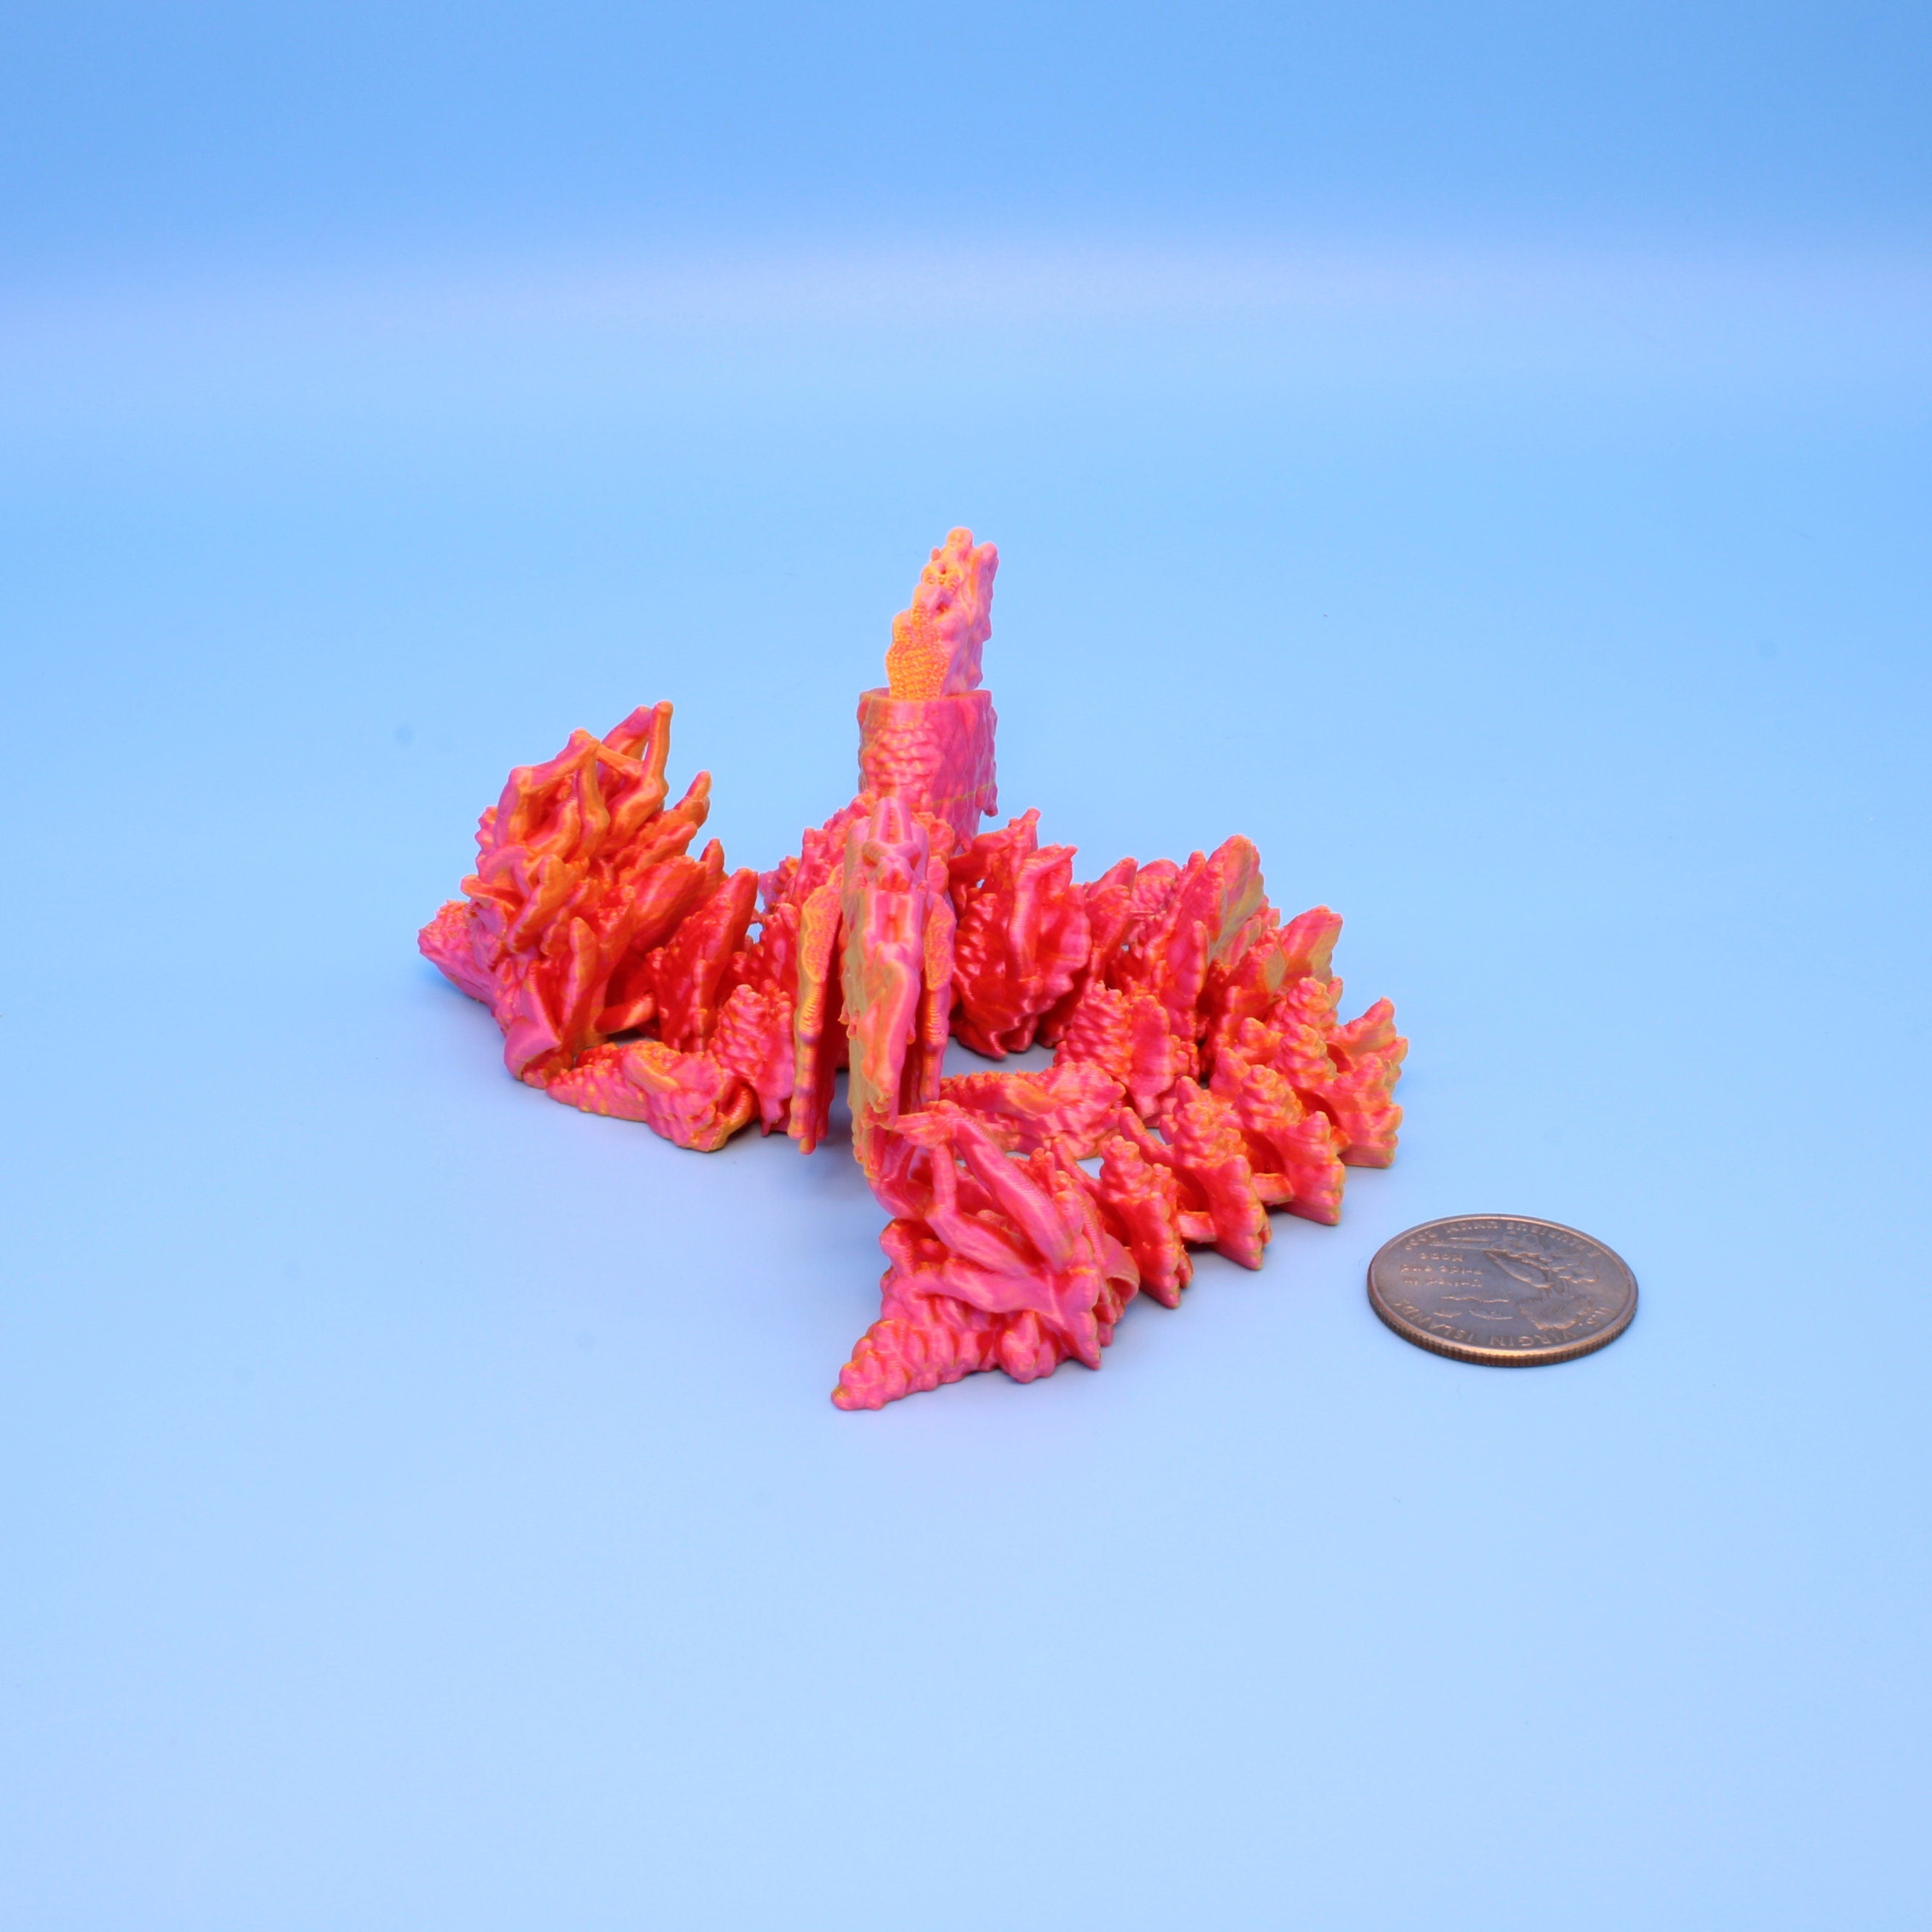 Baby Autumn Wing Dragon | 3D printed | 7 in.